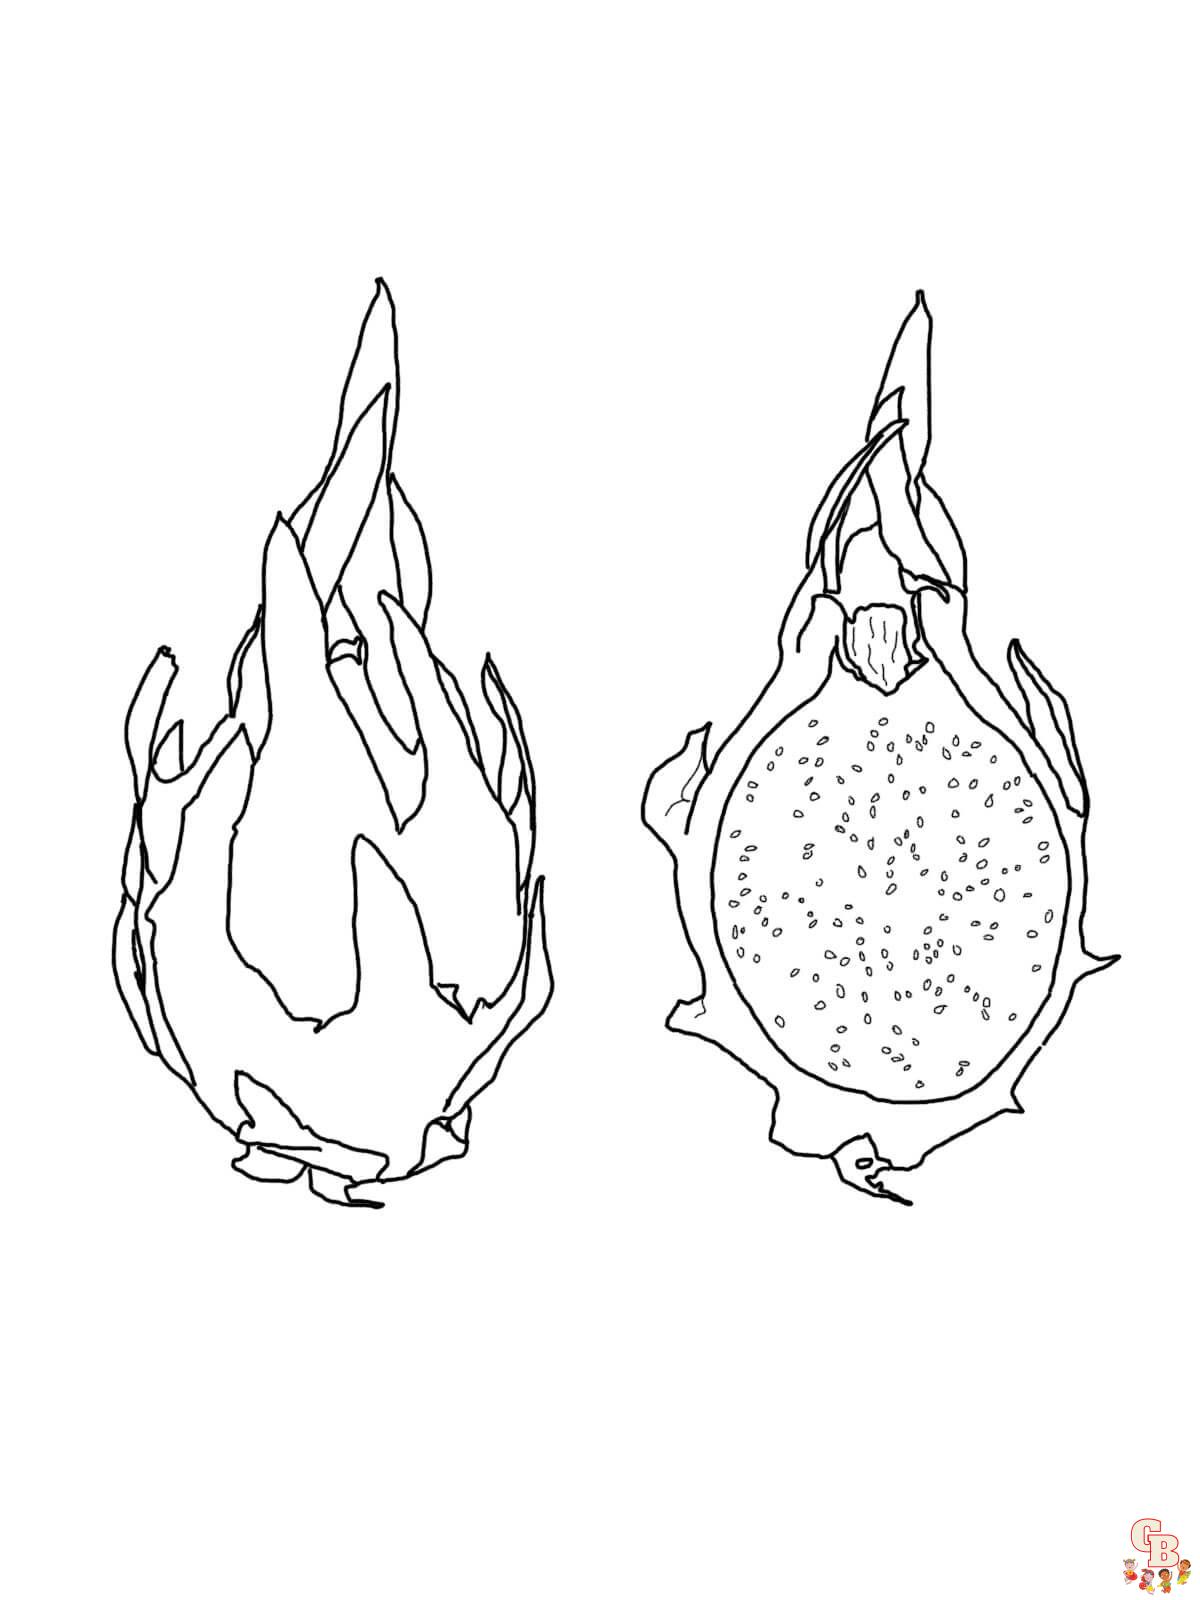 Dragon fruit coloring pages free printable pages for kids